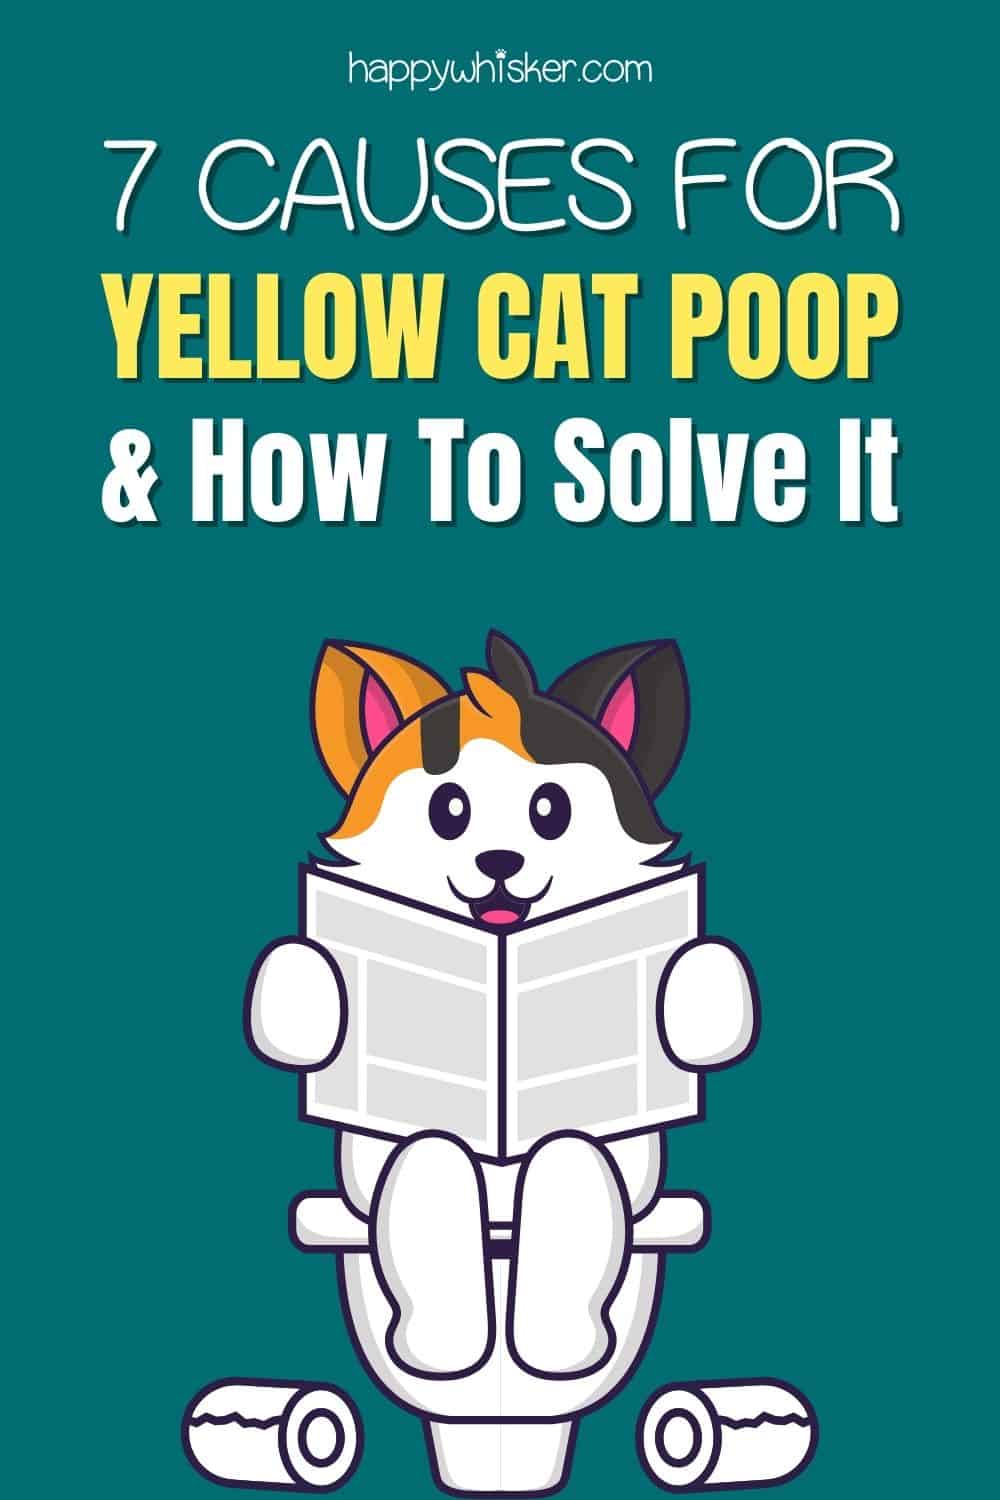 7 Causes For Yellow Cat Poop & How To Solve It Pinterest